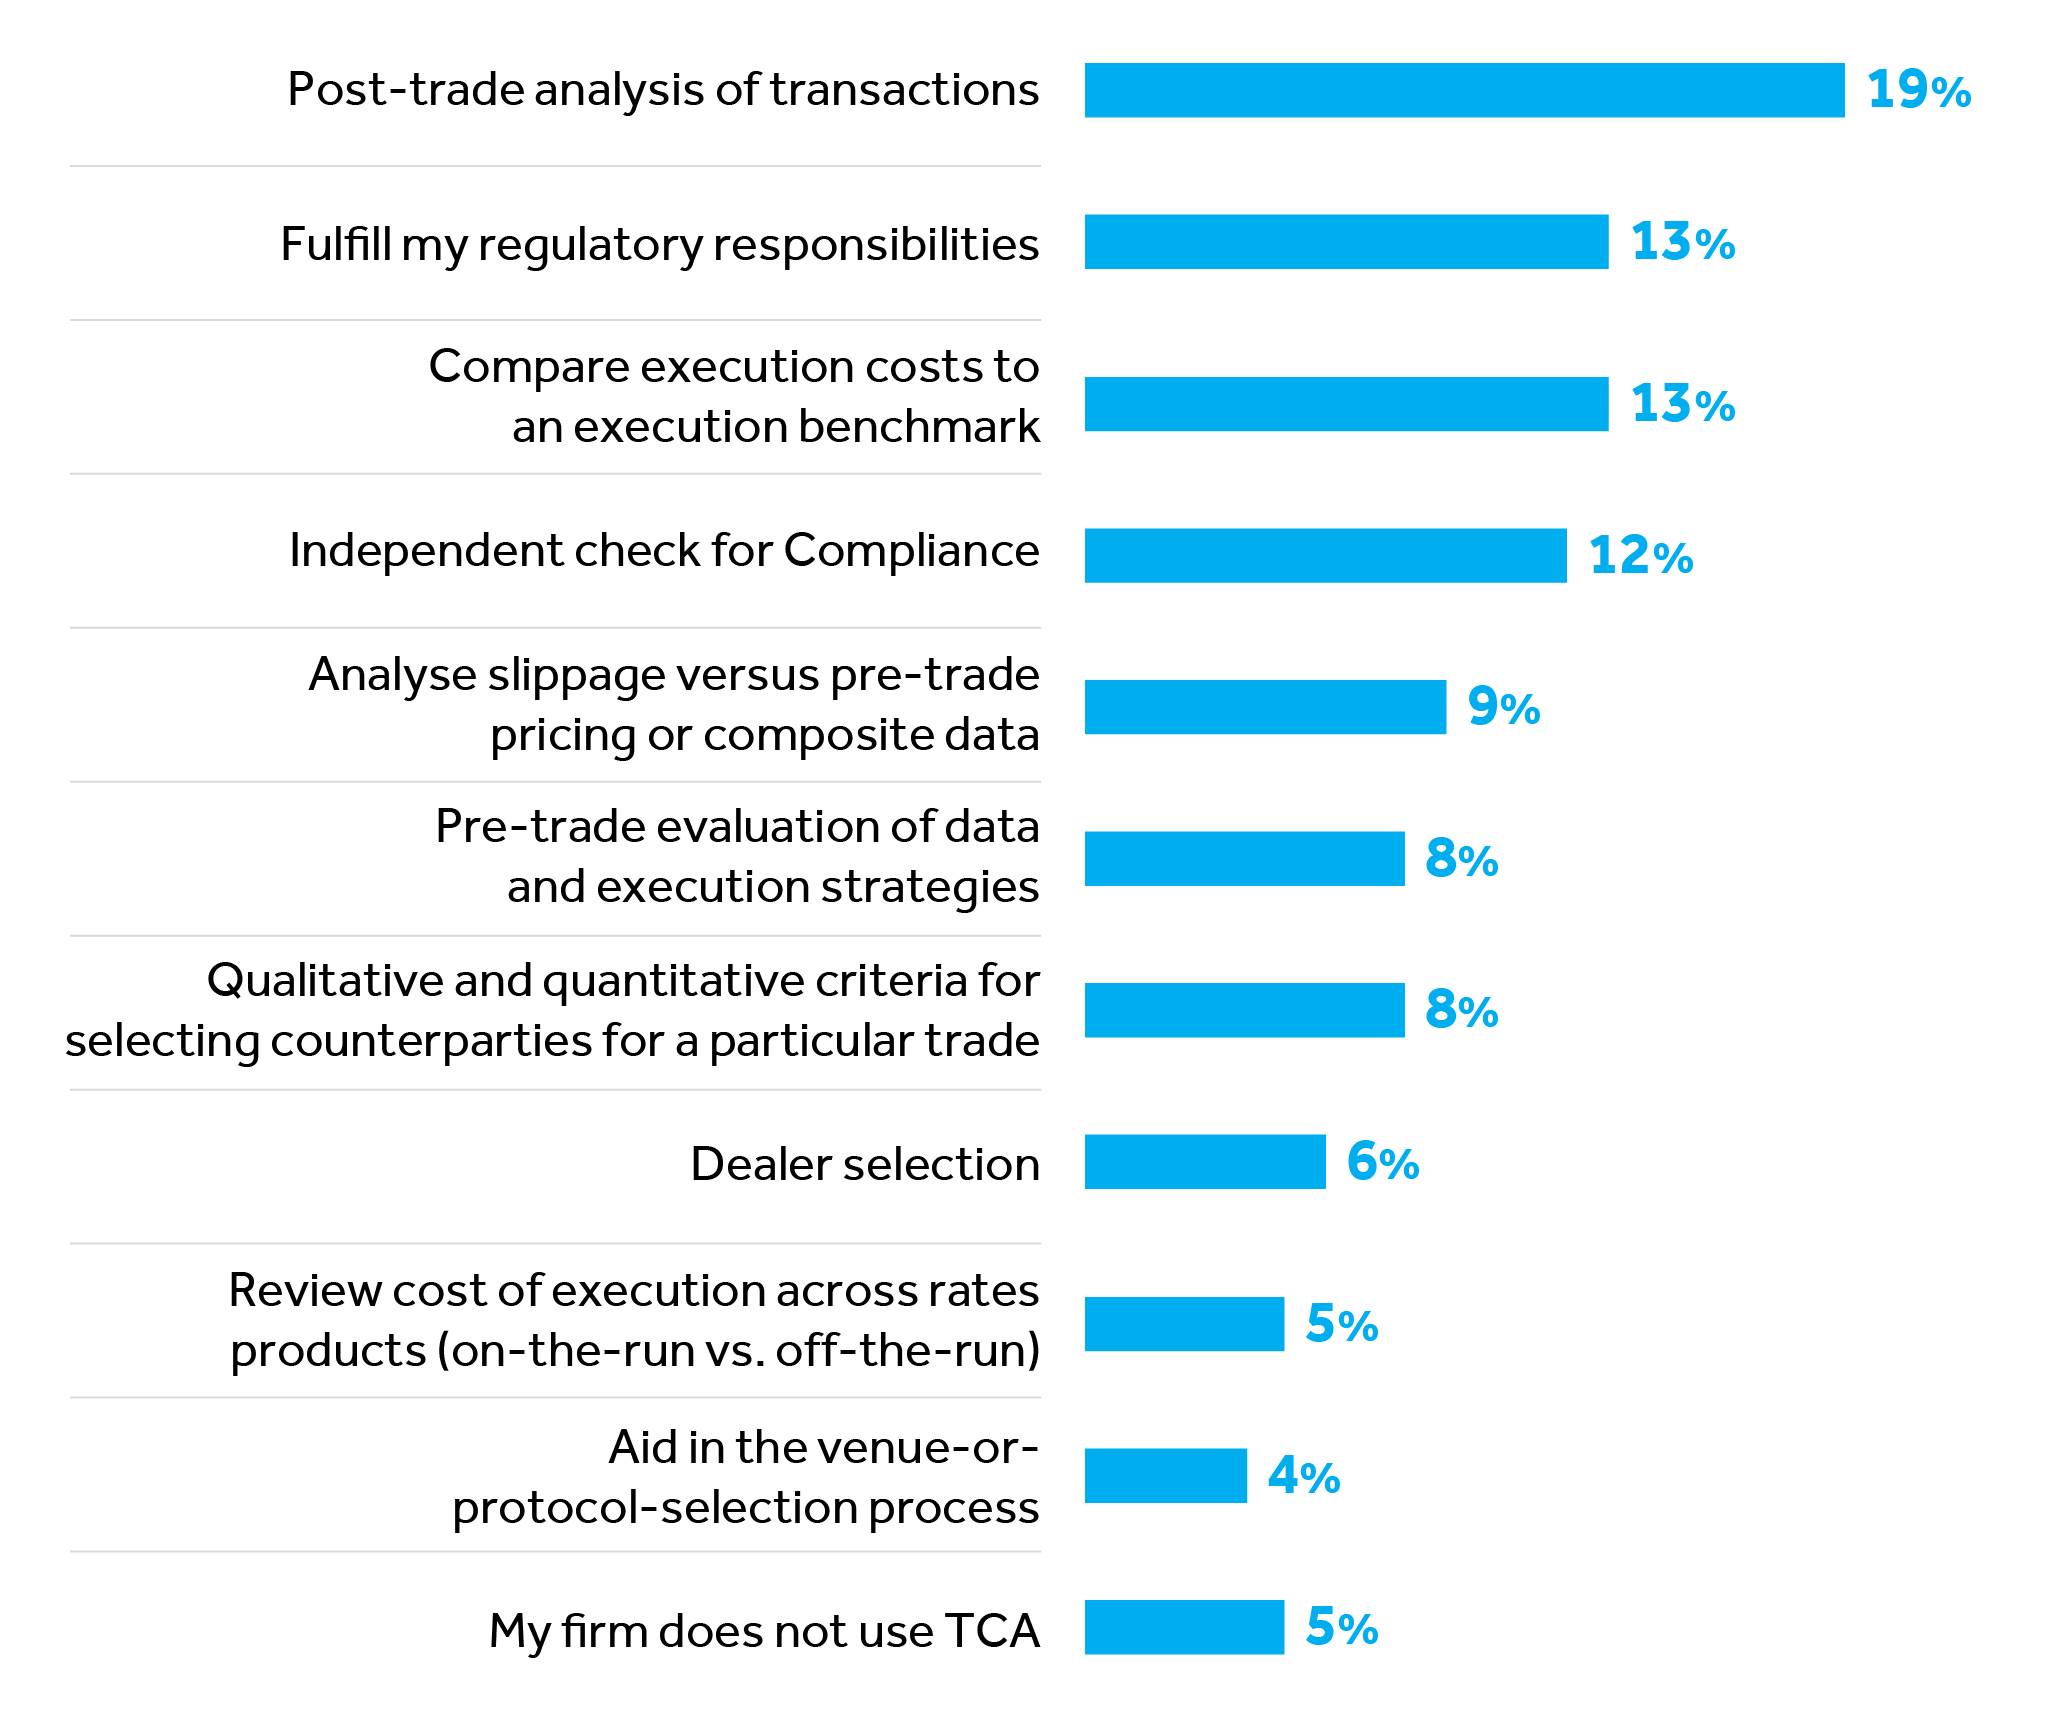 Bar chart depicting responses to survey question "Q: What are your core reasons for having a transaction cost analysis (TCA) system?"